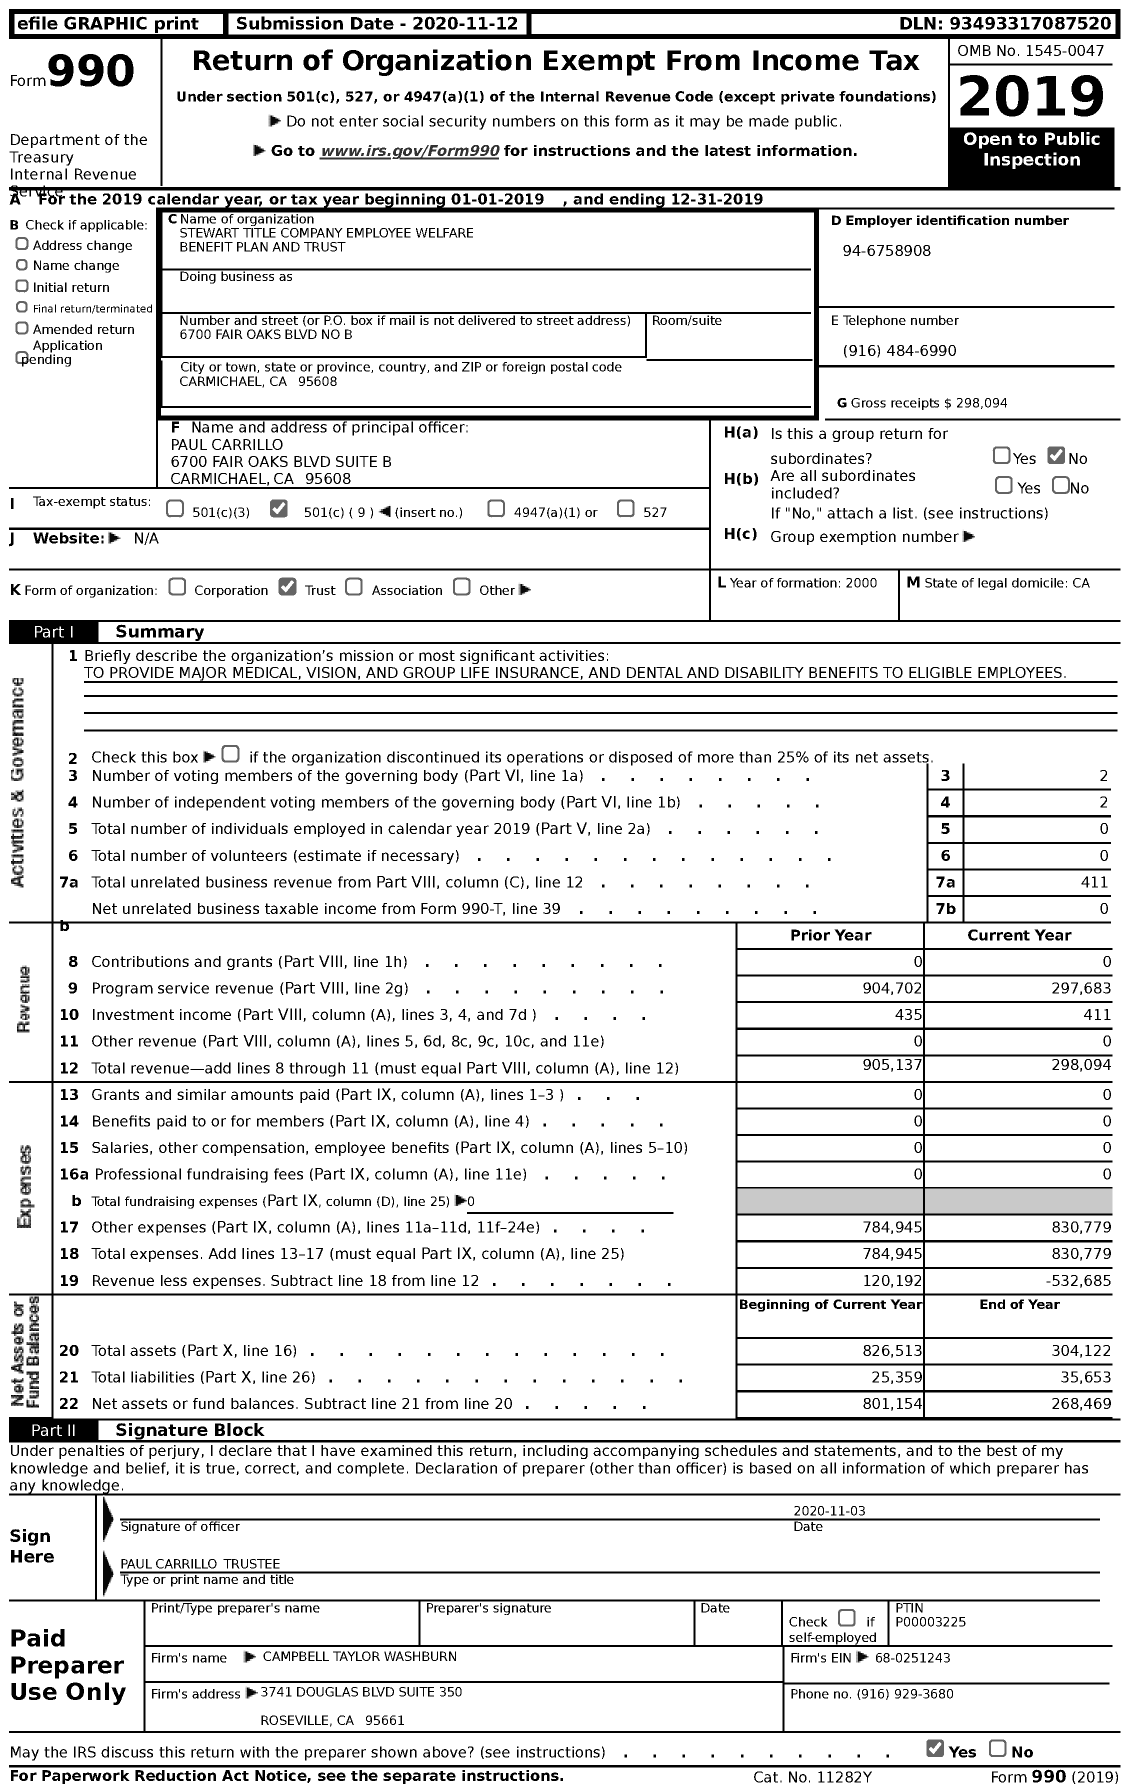 Image of first page of 2019 Form 990 for Stewart Title Company Employee Welfare Benefit Plan and Trust